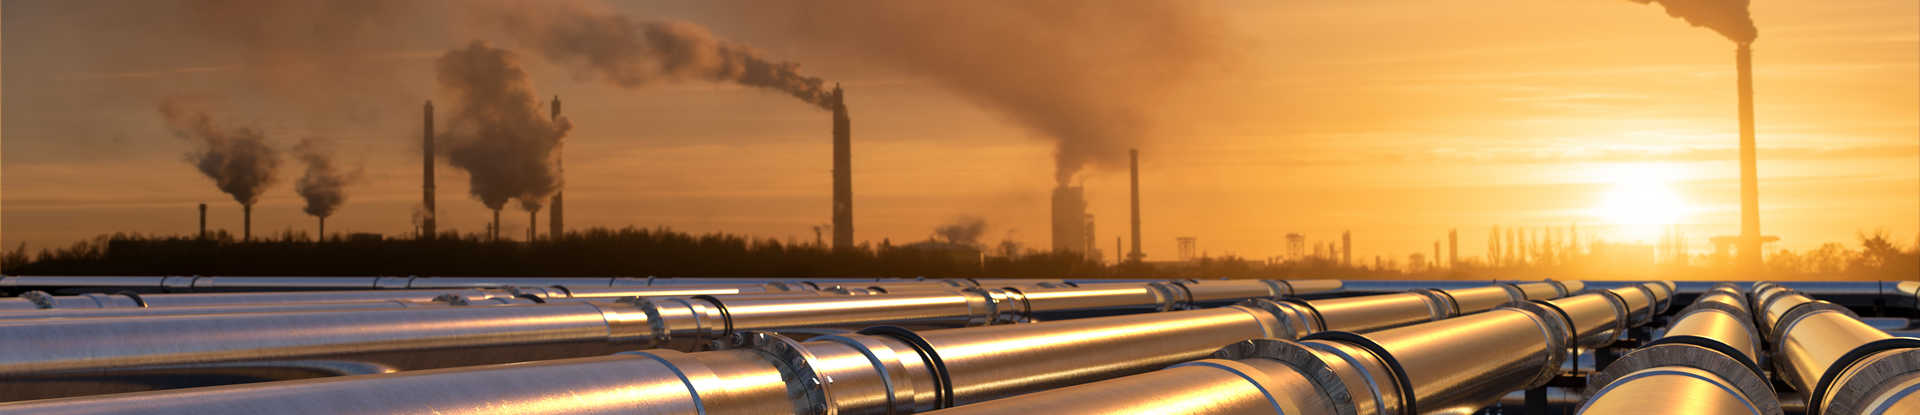 Pipelines leading to an oil refinery at sunset